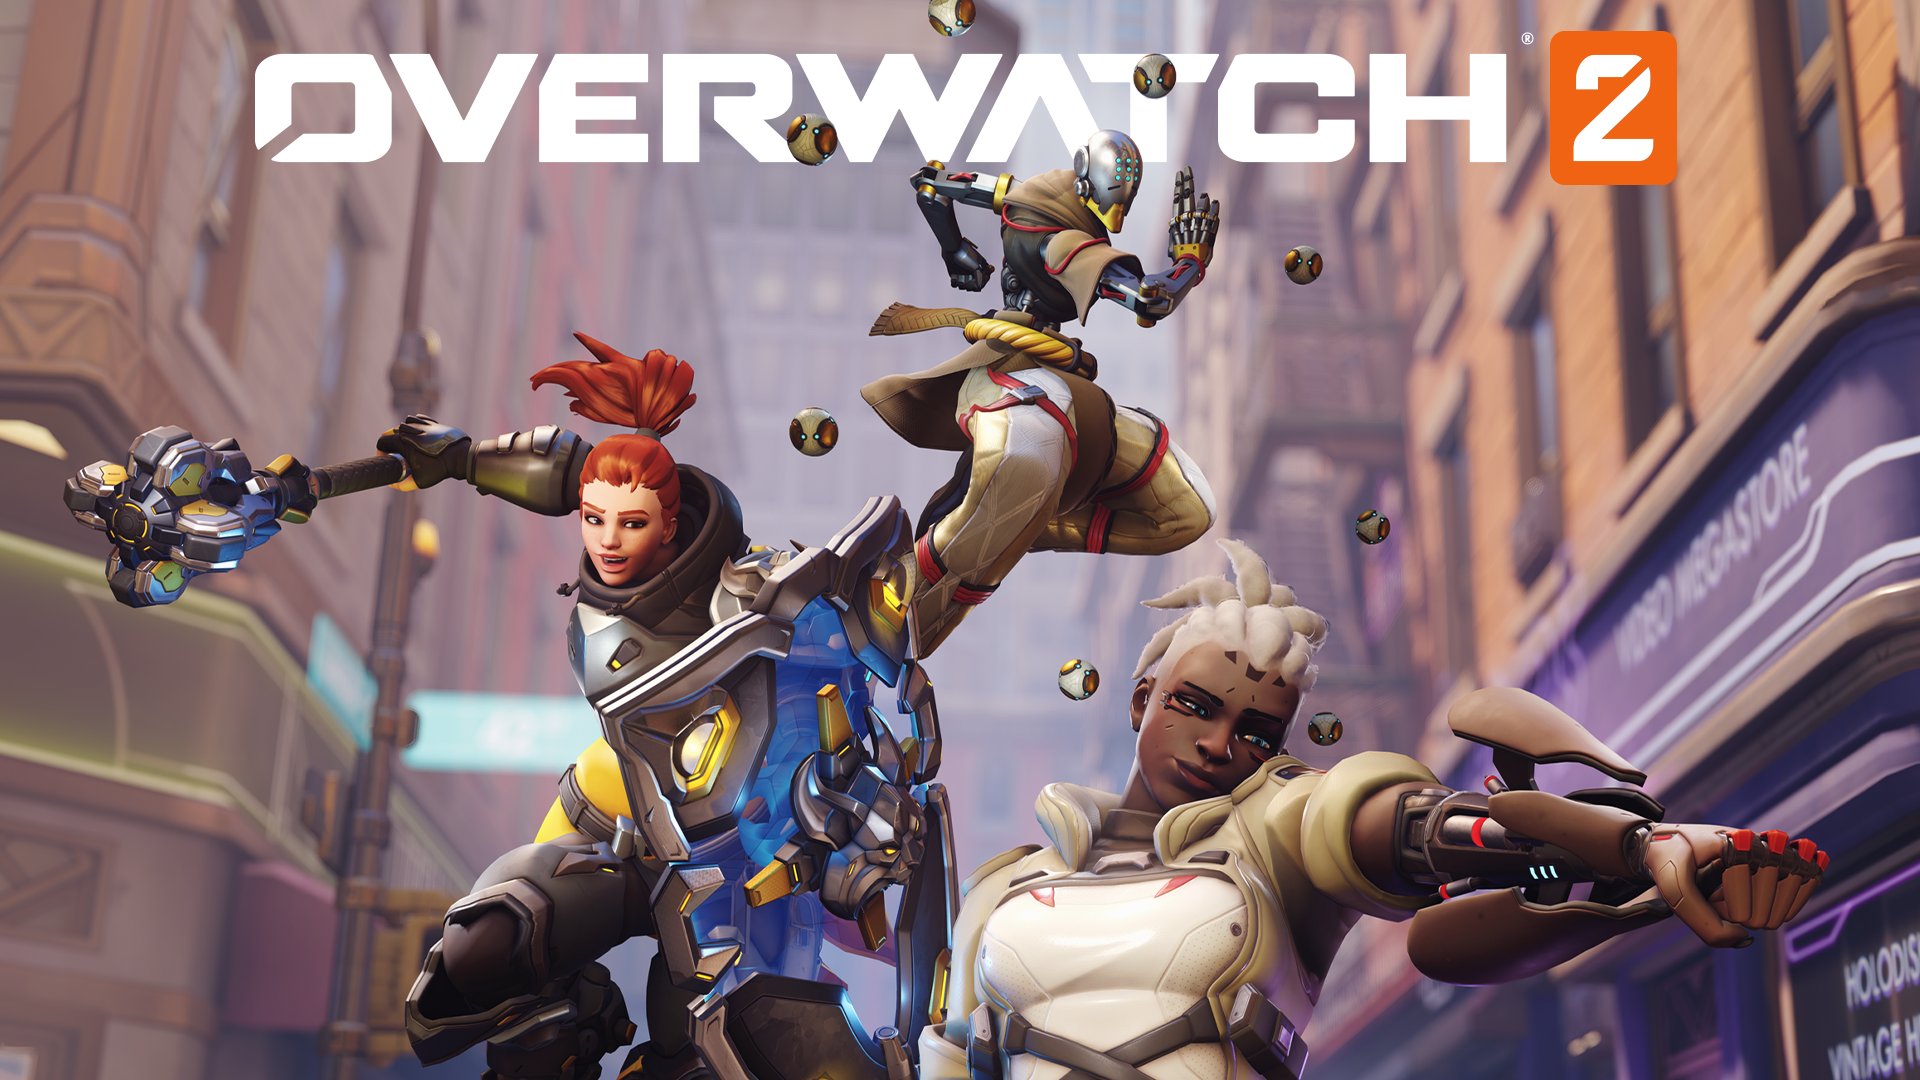 Overwatch Let S Break It Down Overwatch2 Pvp Beta April 26 11am Pt Invites Sent To Select Participants Beta Roll Out Begins April 27 11am